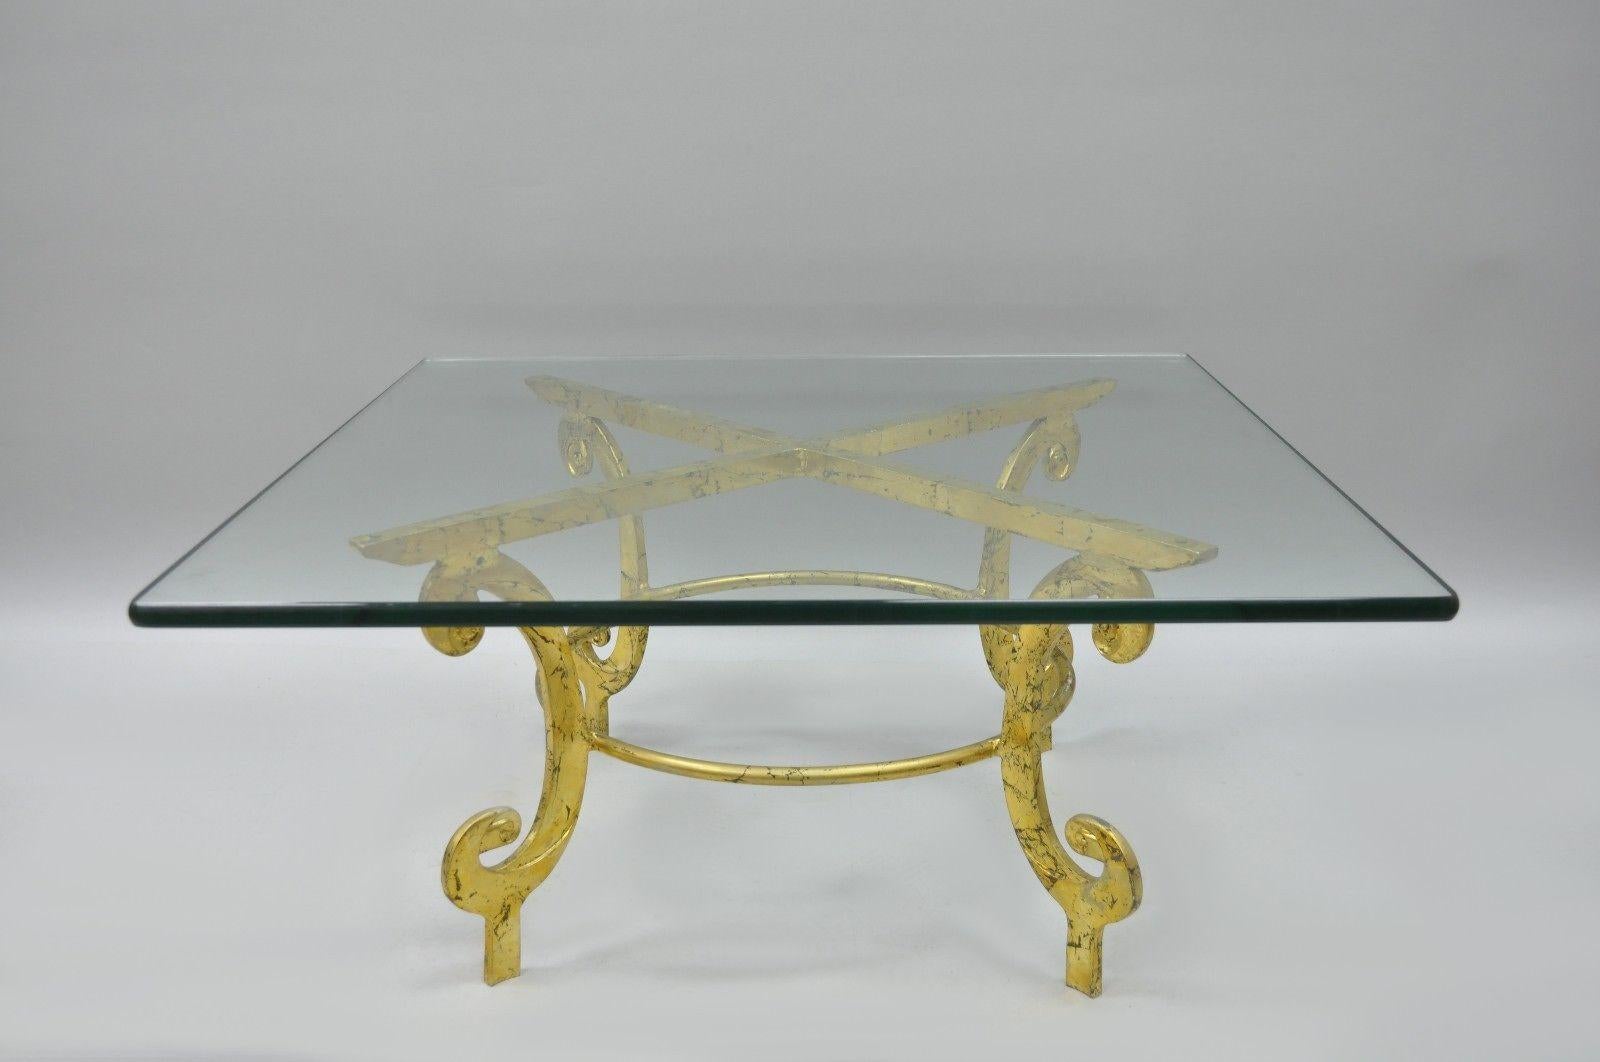 Vintage Gold Metal and Glass Italian Hollywood Regency Scrolling Coffee Table For Sale 1